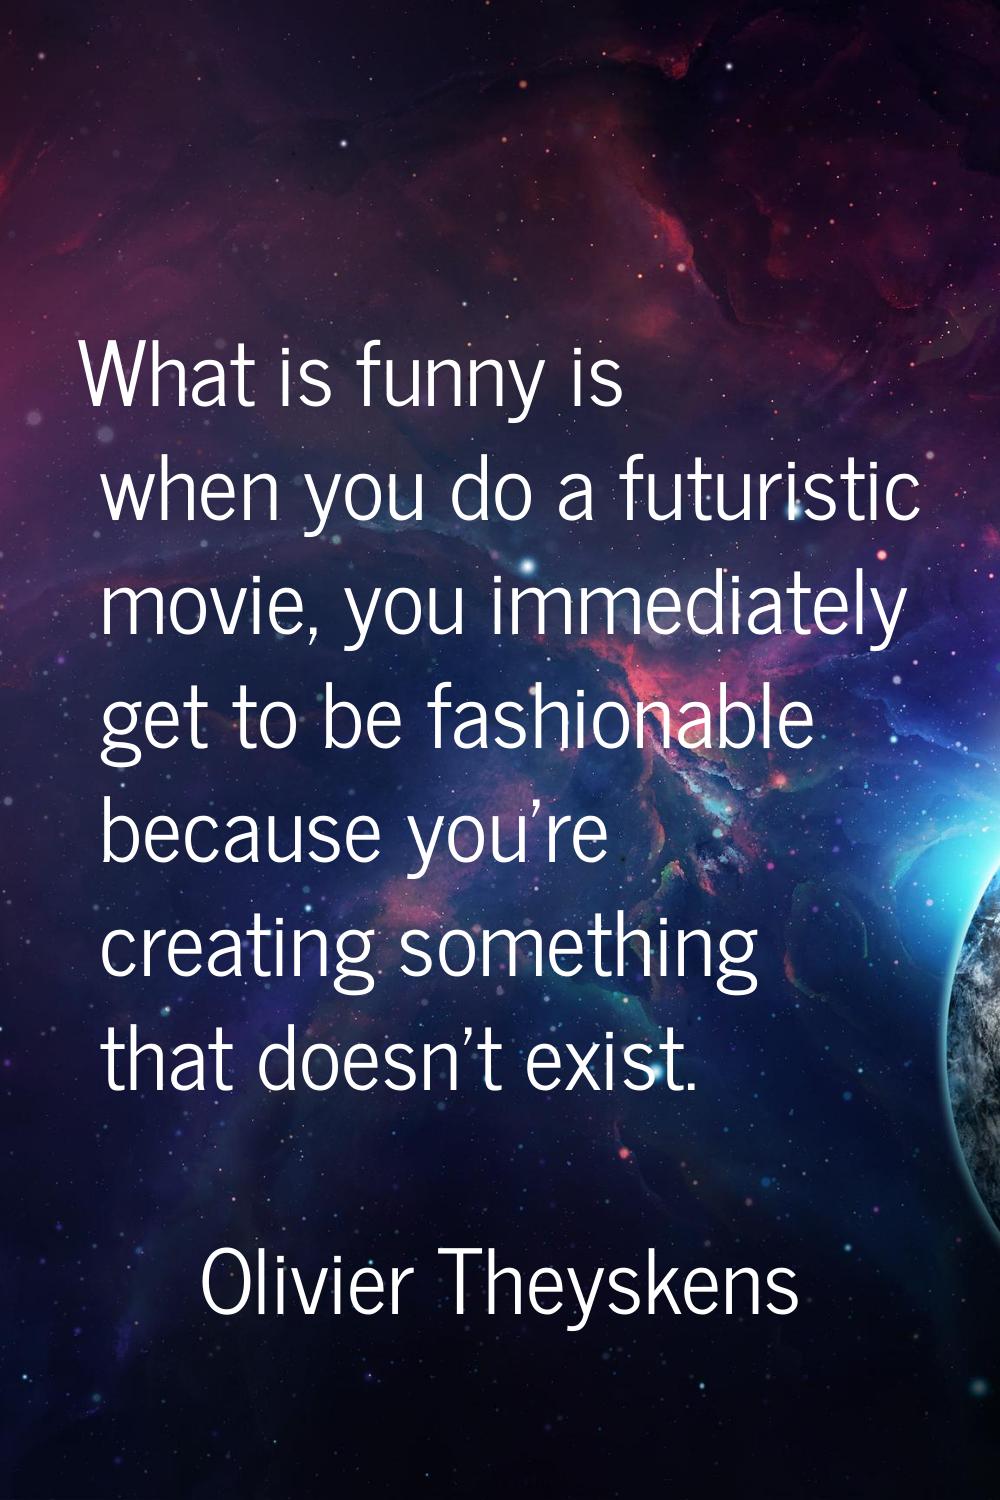 What is funny is when you do a futuristic movie, you immediately get to be fashionable because you'